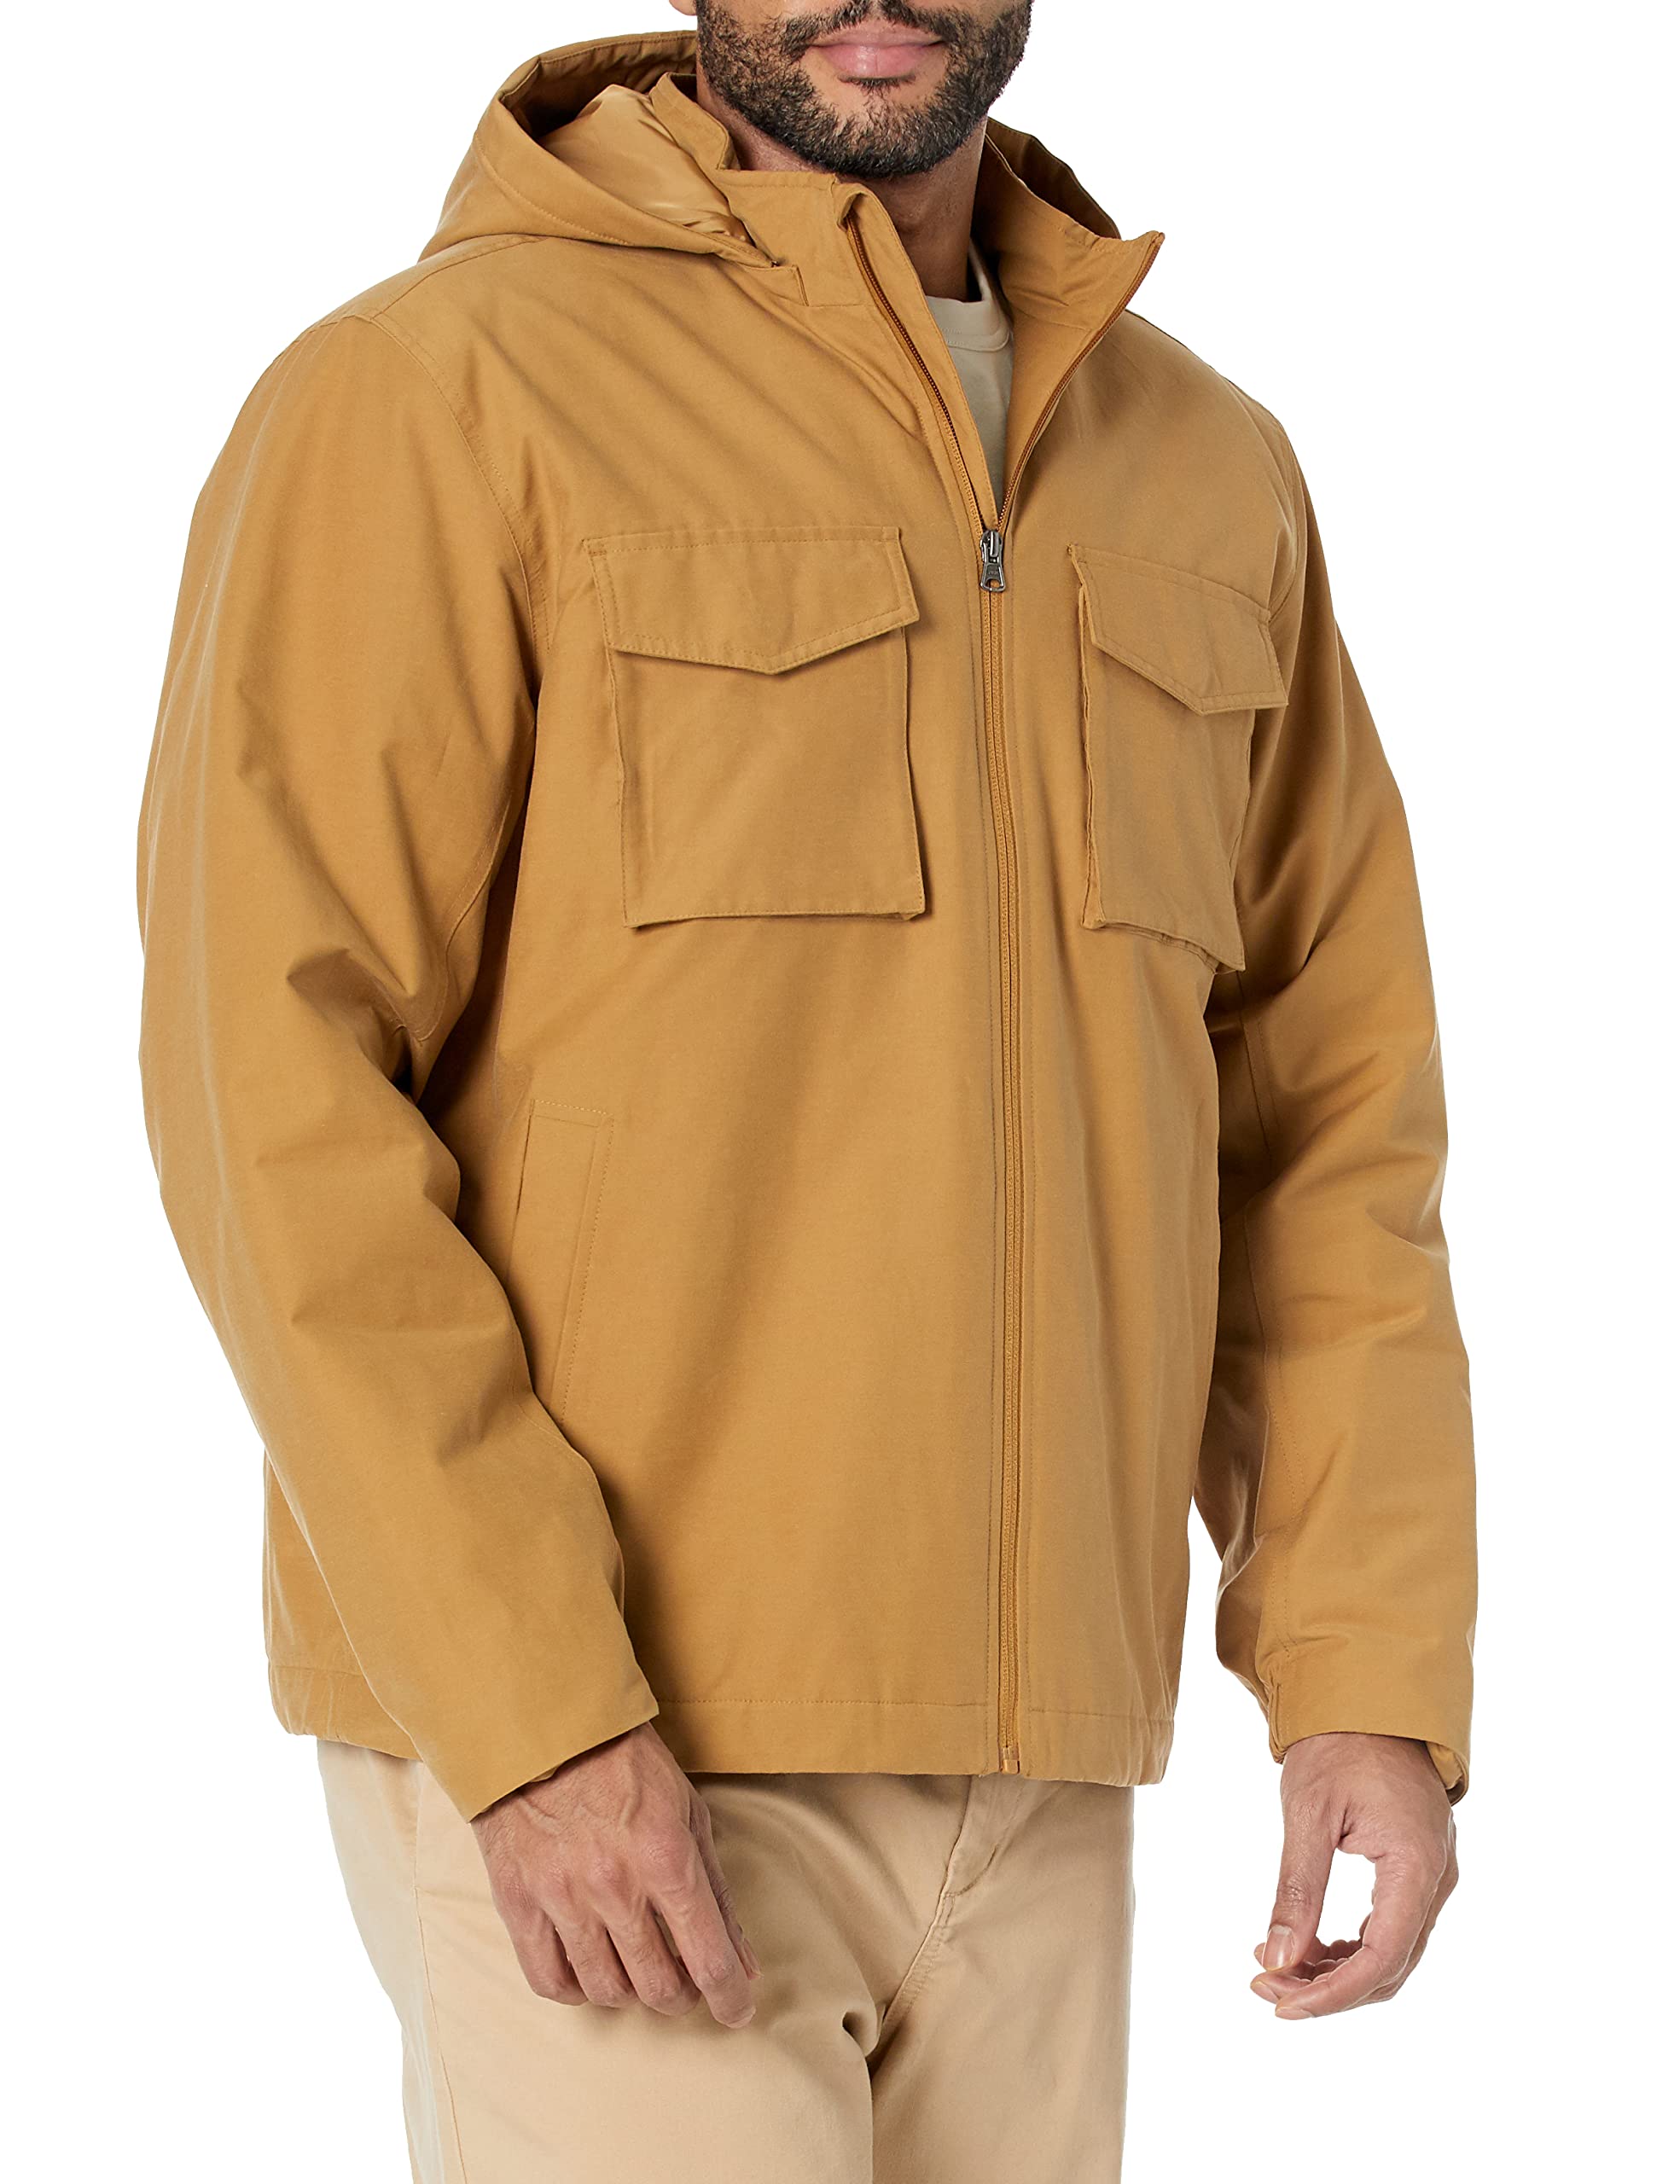 Amazon Essentials Men's Insulated Rain Jacket (Regular, Big & Tall) $20.90 + Free Shipping w/ Prime or on $35+